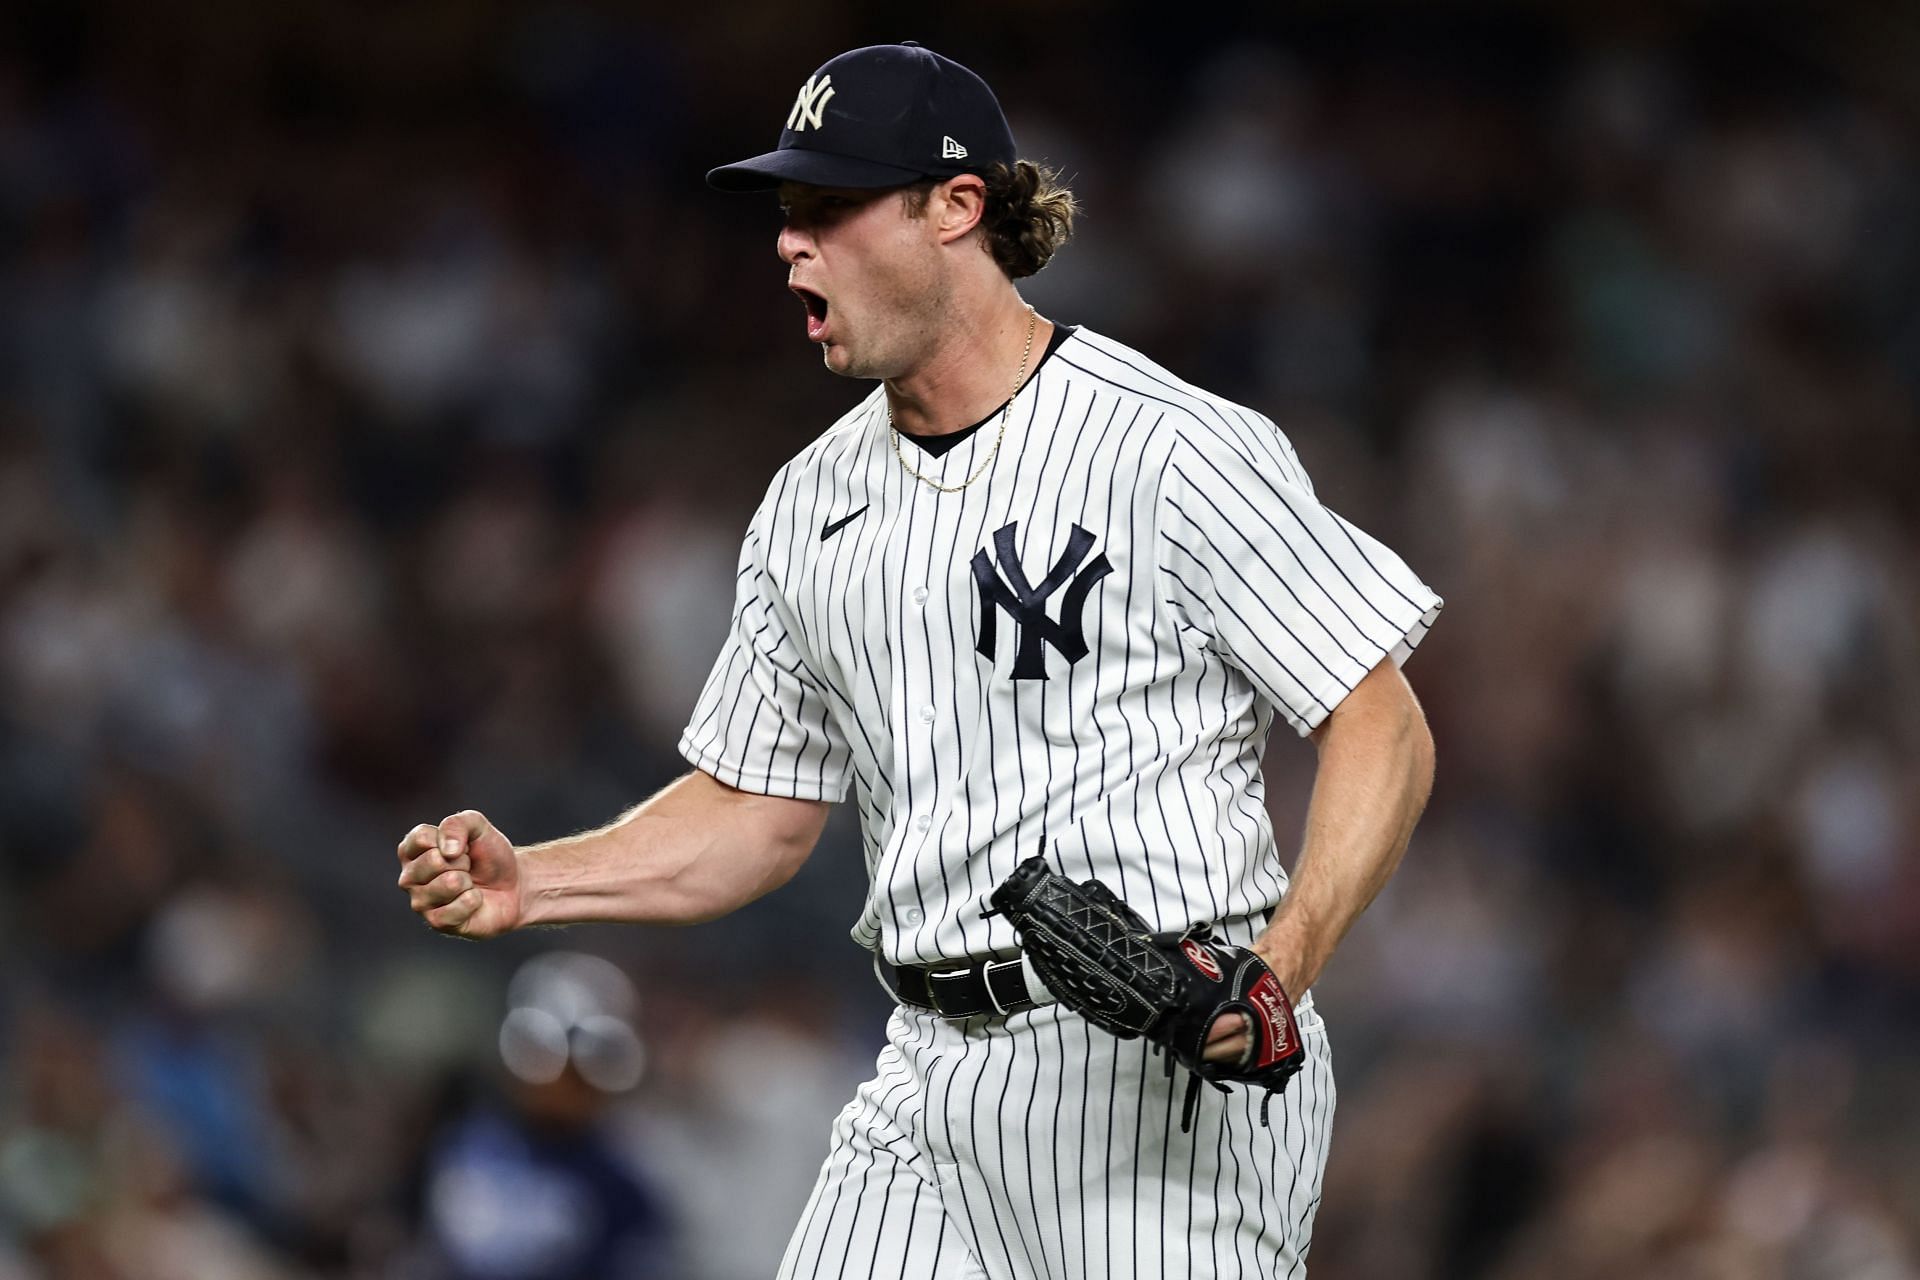 New York Yankees starting pitcher Gerrit Cole improved to 6-1 on the season